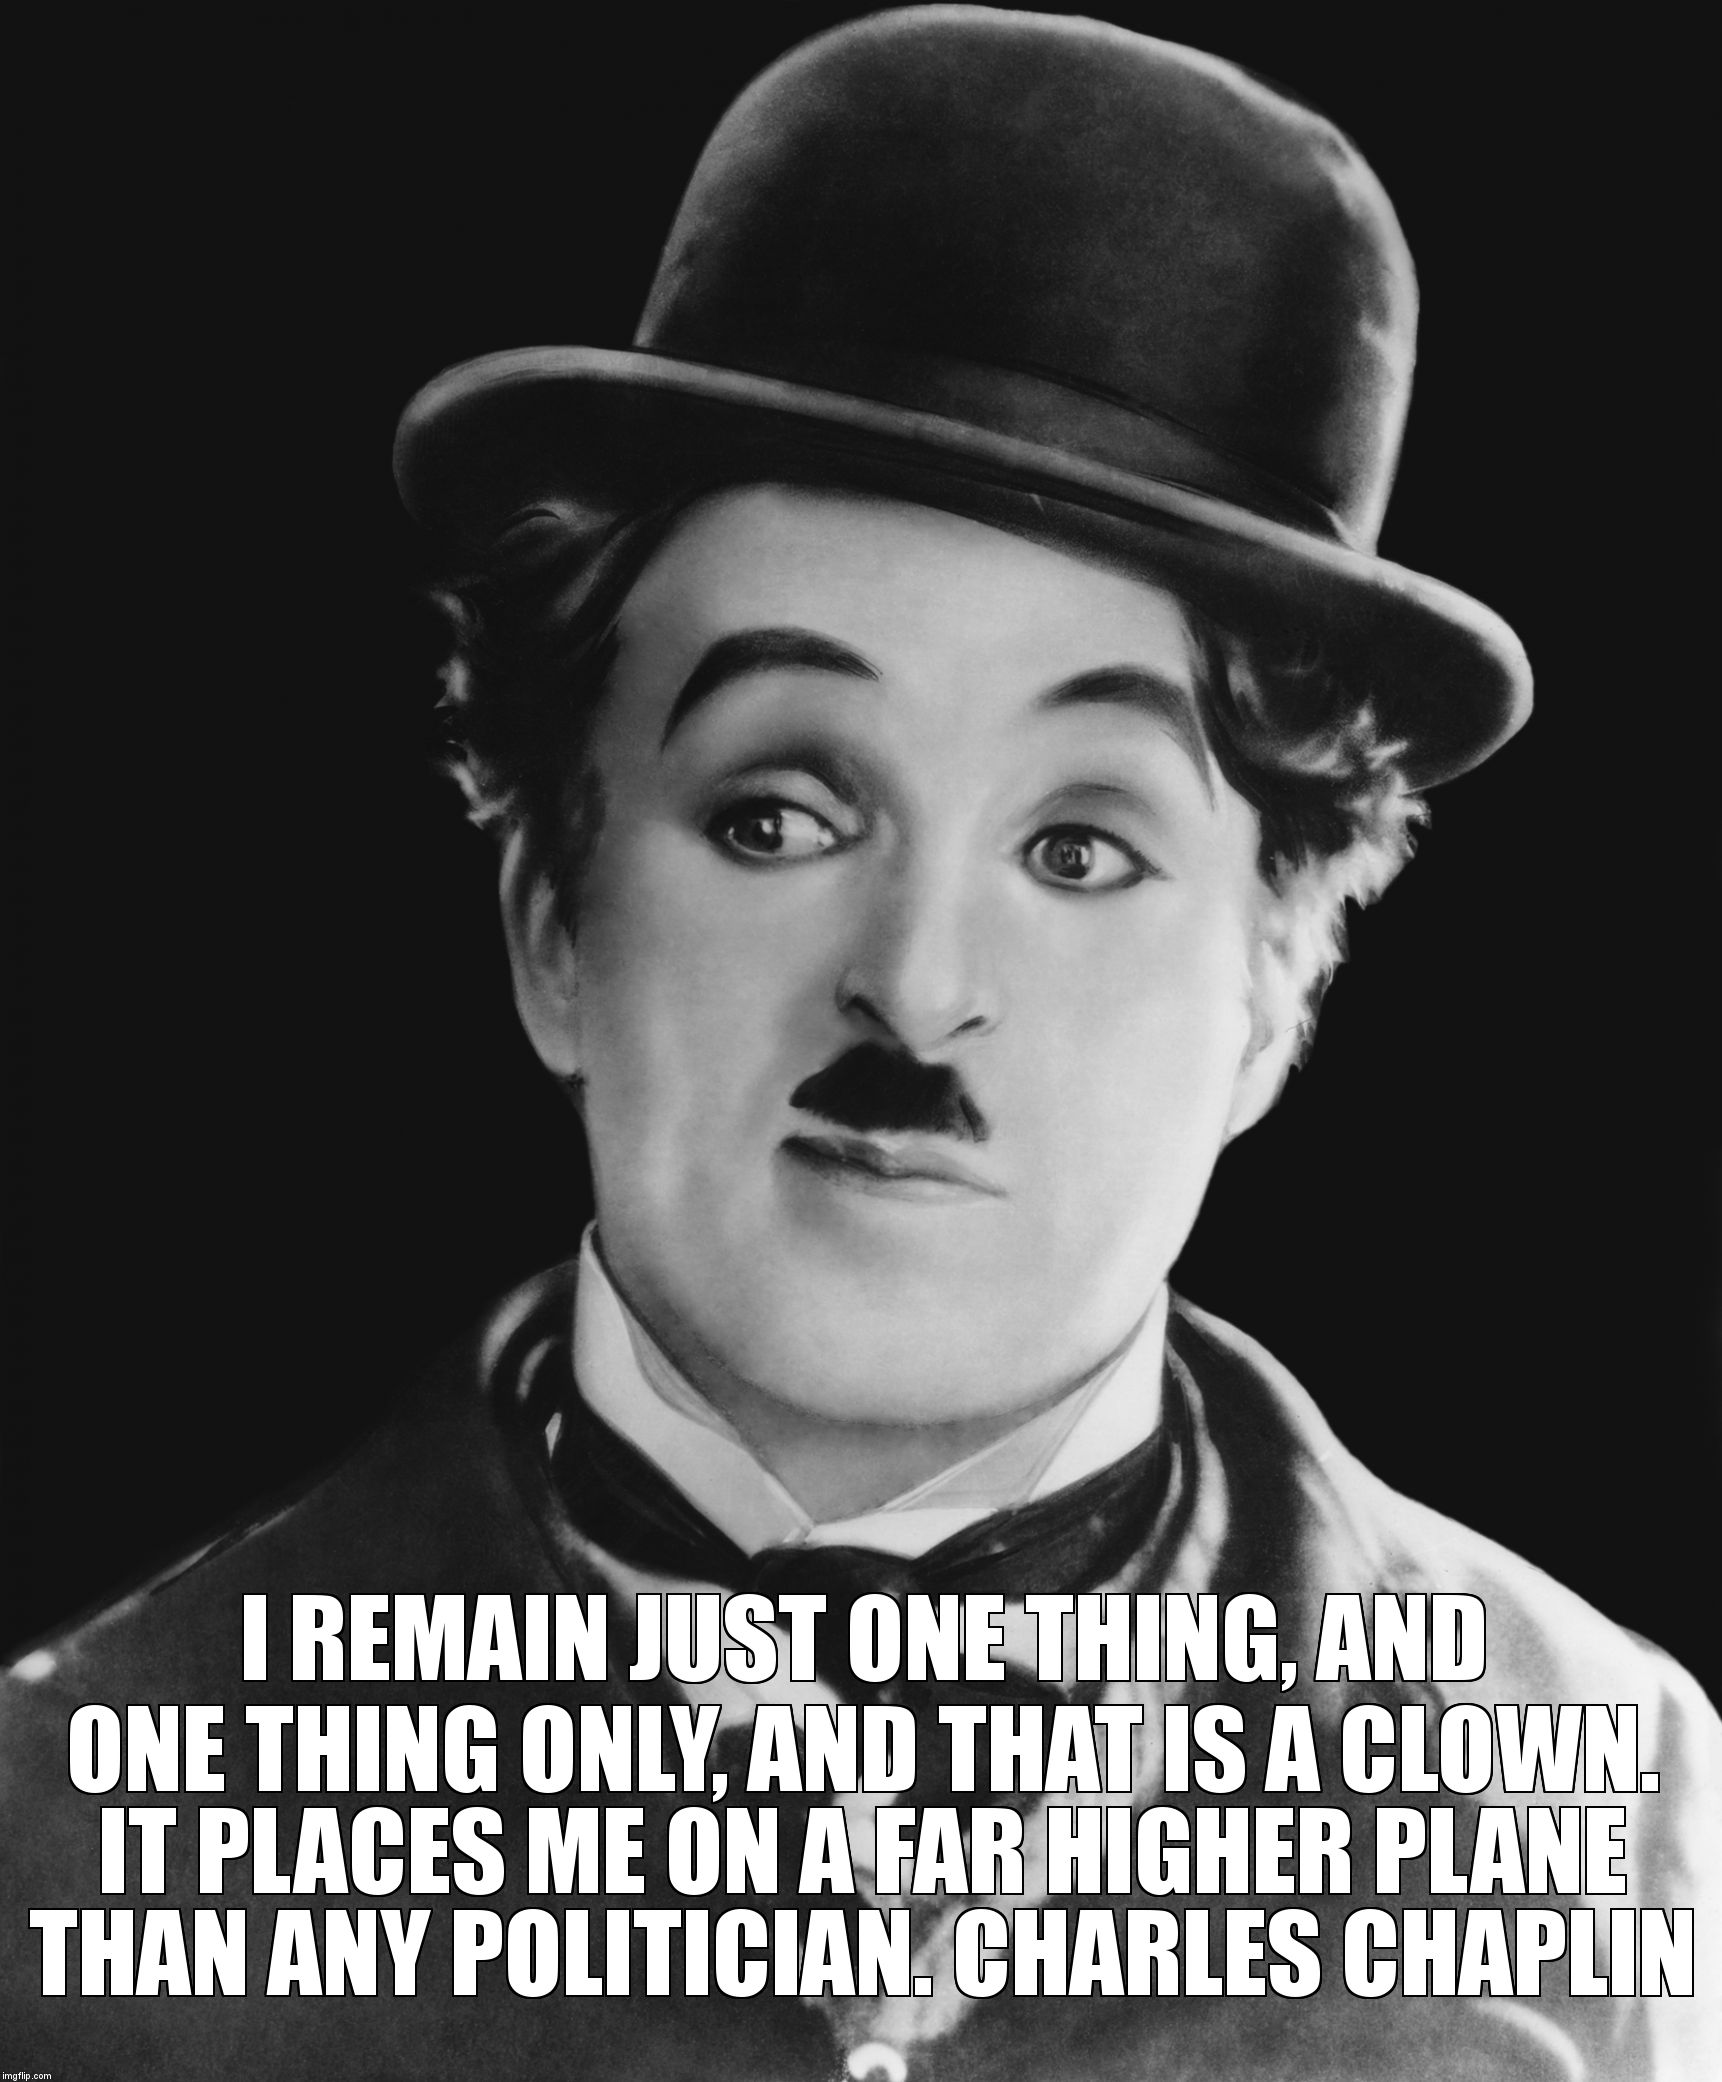 Charlie Chaplin Quote  | I REMAIN JUST ONE THING, AND ONE THING ONLY, AND THAT IS A CLOWN. IT PLACES ME ON A FAR HIGHER PLANE THAN ANY POLITICIAN. CHARLES CHAPLIN | image tagged in charlie chaplin,charlie chaplin quote,charlie politcal,politics,clowns,quote | made w/ Imgflip meme maker